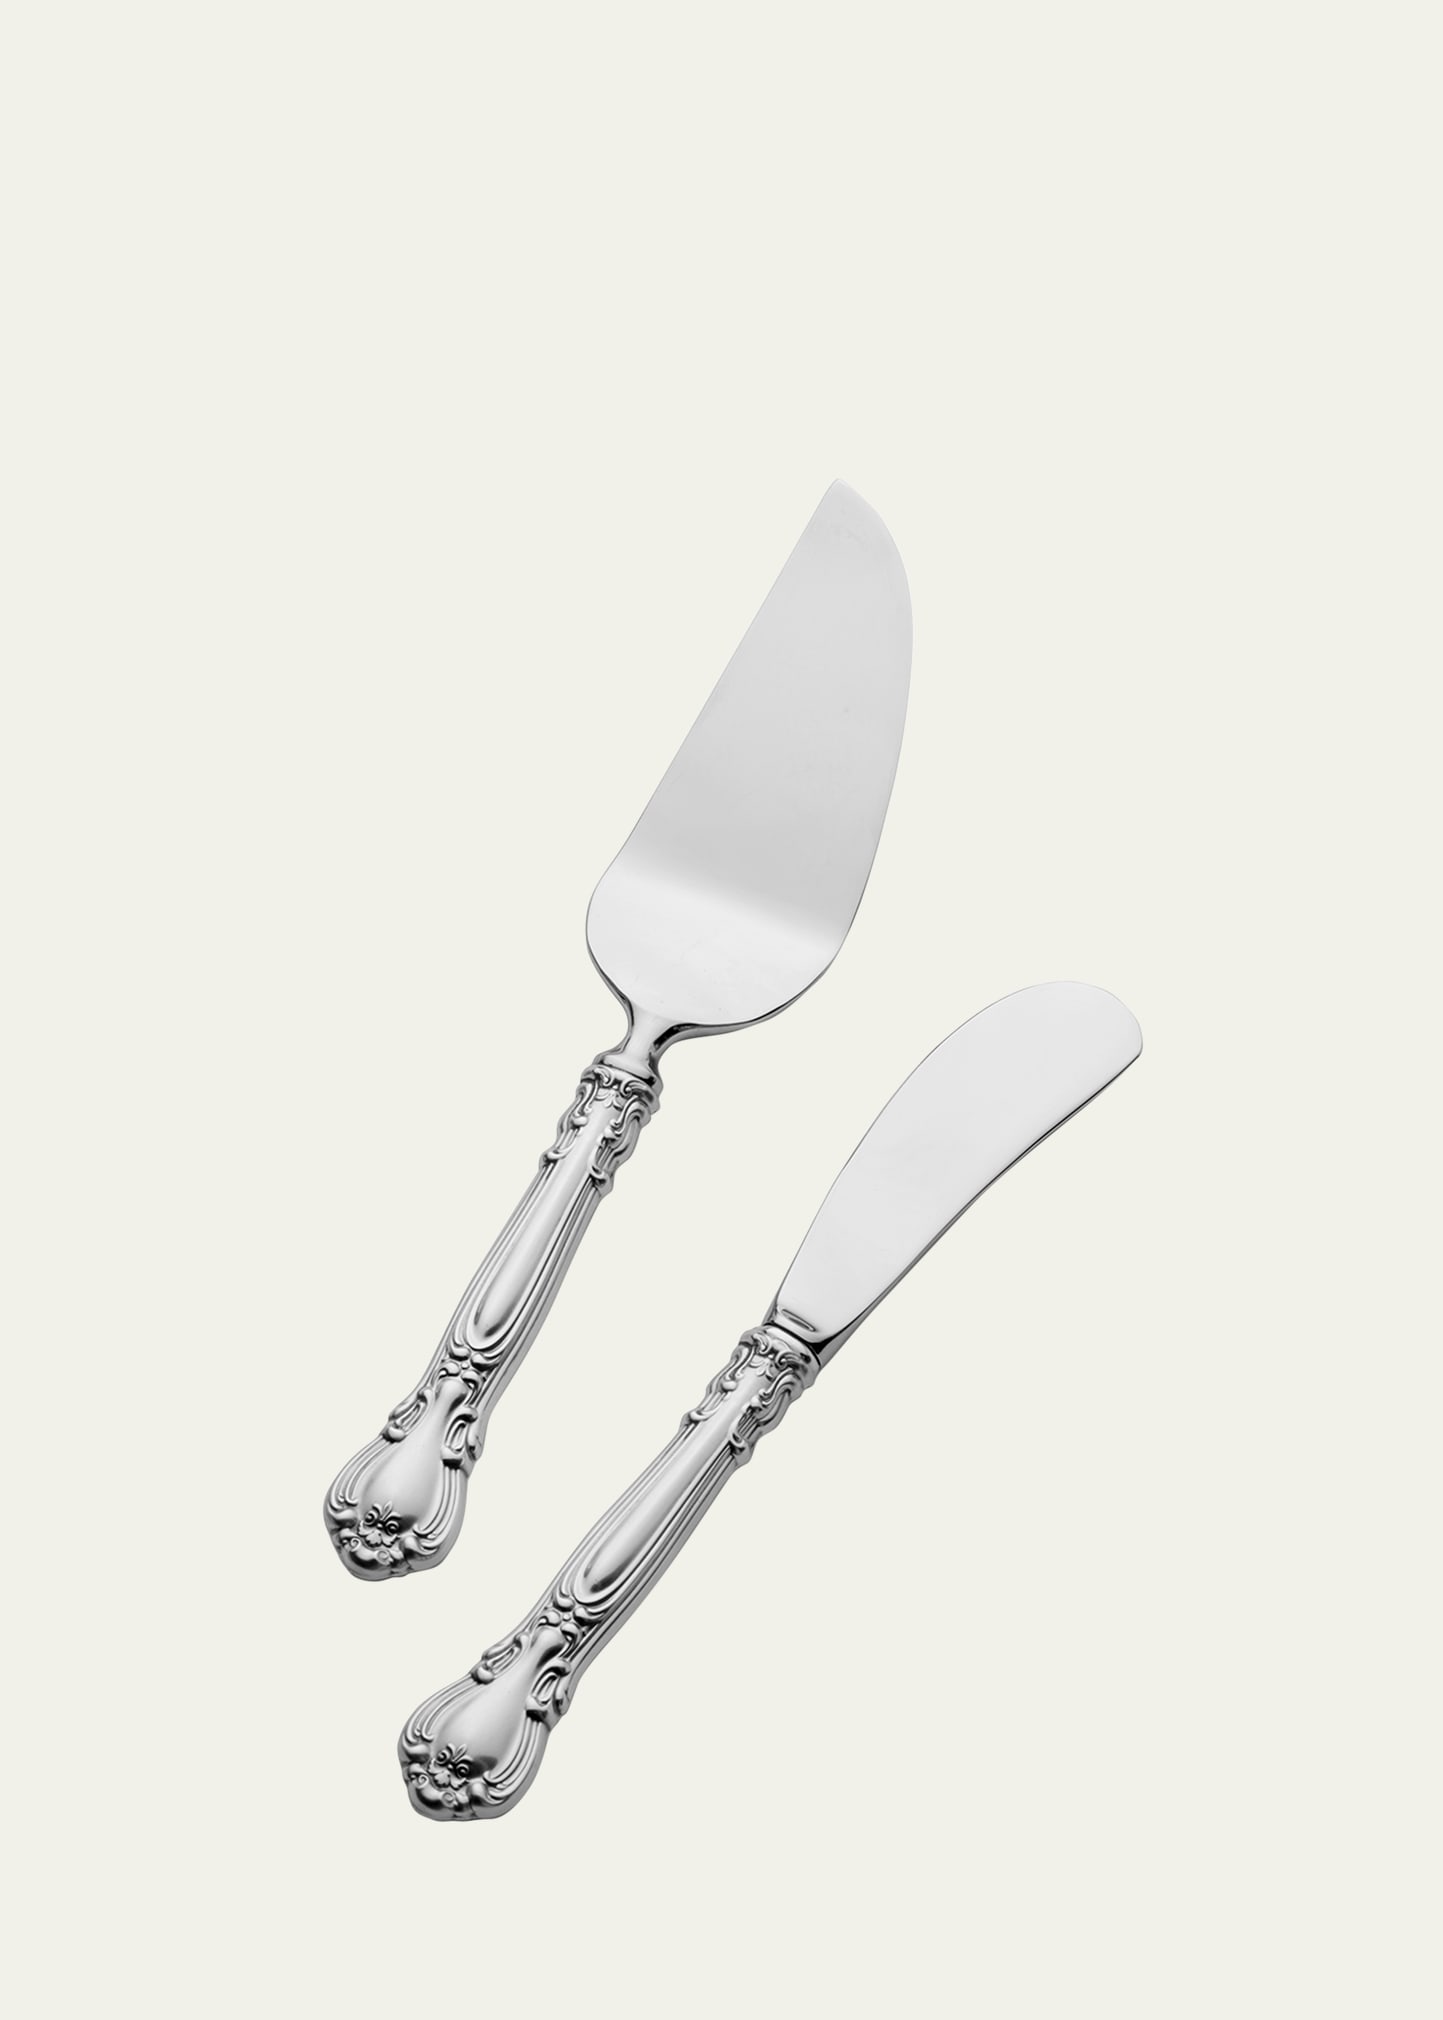 Grand Baroque 2-Piece Cheese Knife Set